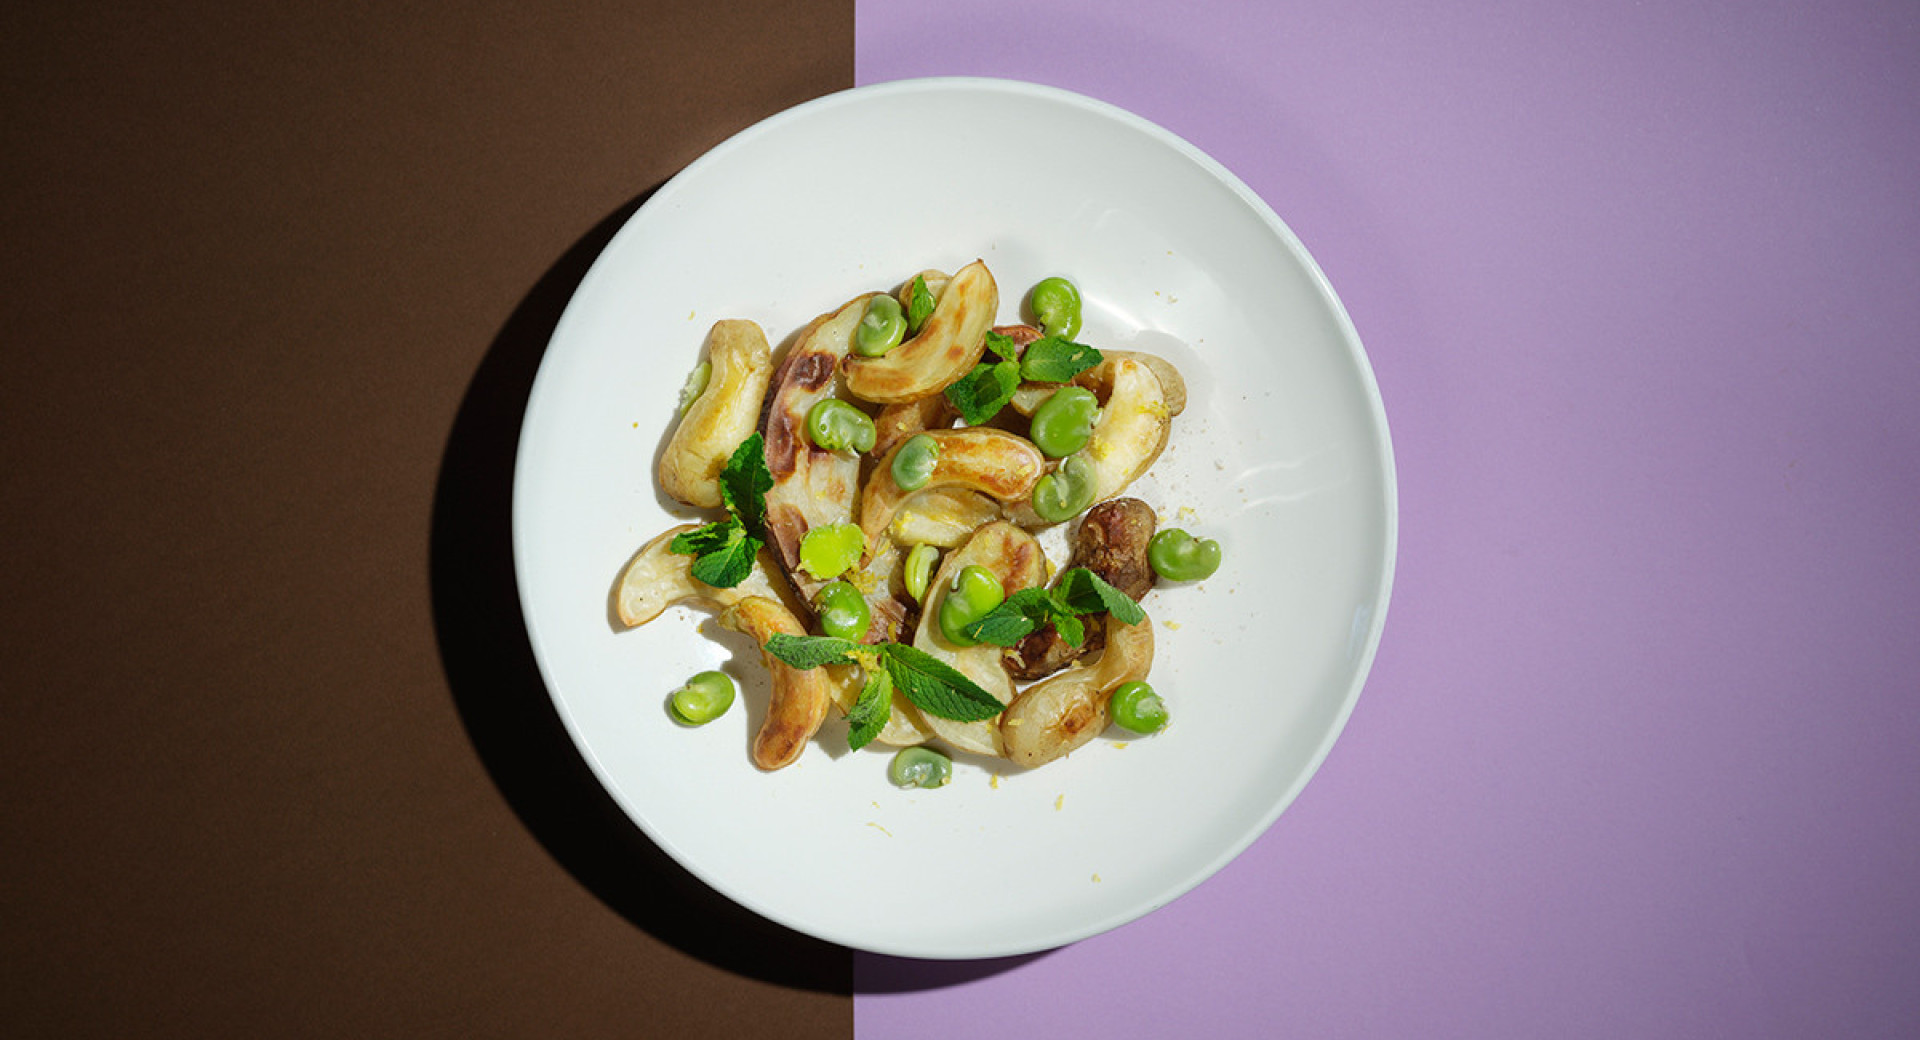 A white plate on a brown and violet base. On the plate, there's roasted potatoes sprinkled with green peas.